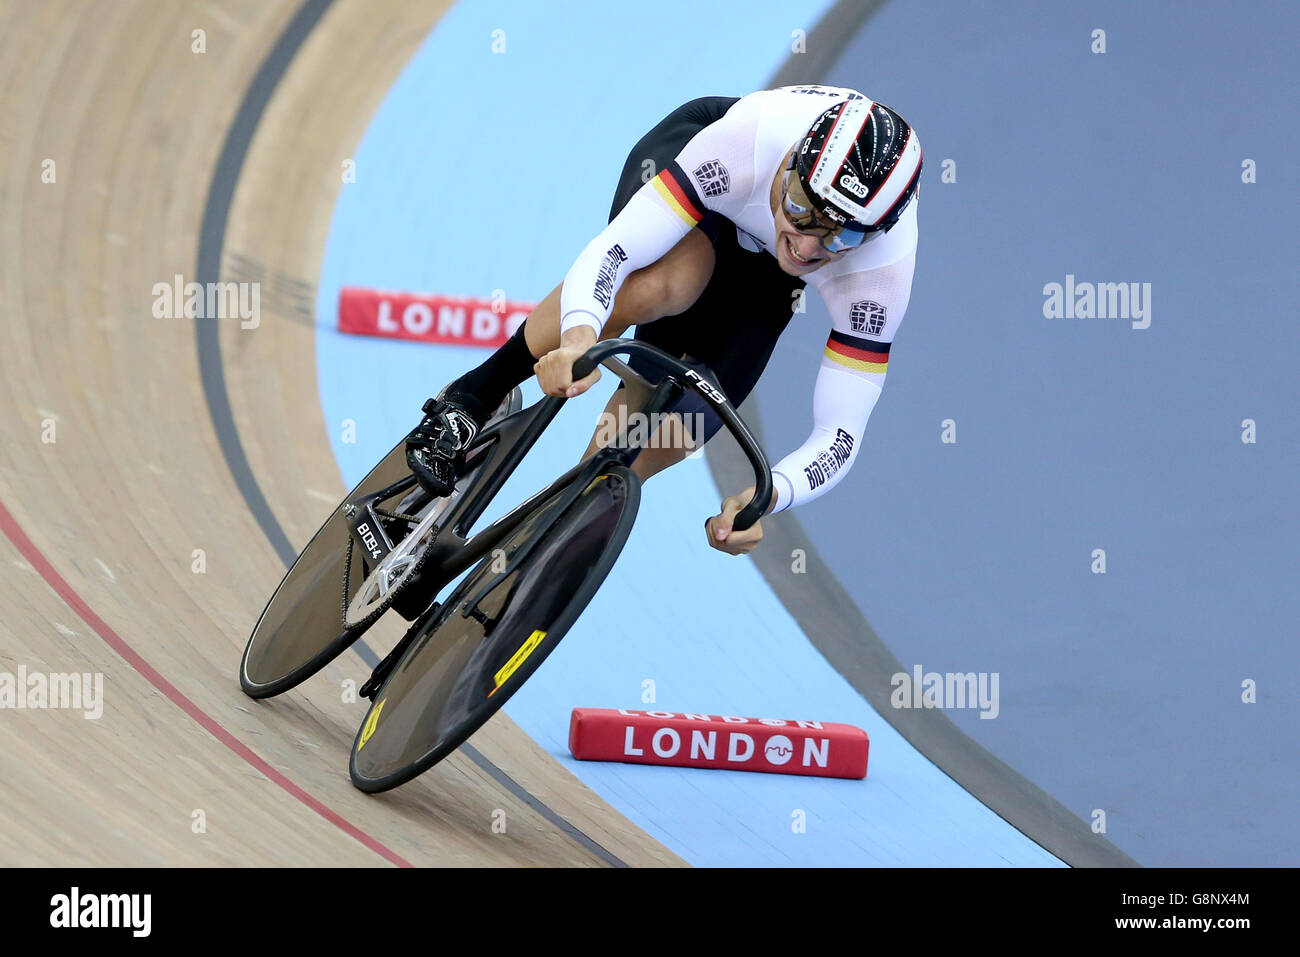 Germany's Max Niederlag competes in the Men's Sprint during day three of the UCI Track Cycling World Championships at Lee Valley VeloPark, London. PRESS ASSOCIATION Photo. Picture date: Friday March 4, 2016. See PA story CYCLING World. Photo credit should read: Tim Goode/PA Wire. RESTRICTIONS: , No commercial use without prior permission, please contact PA Images for further information: Tel: +44 (0) 115 8447447. Stock Photo